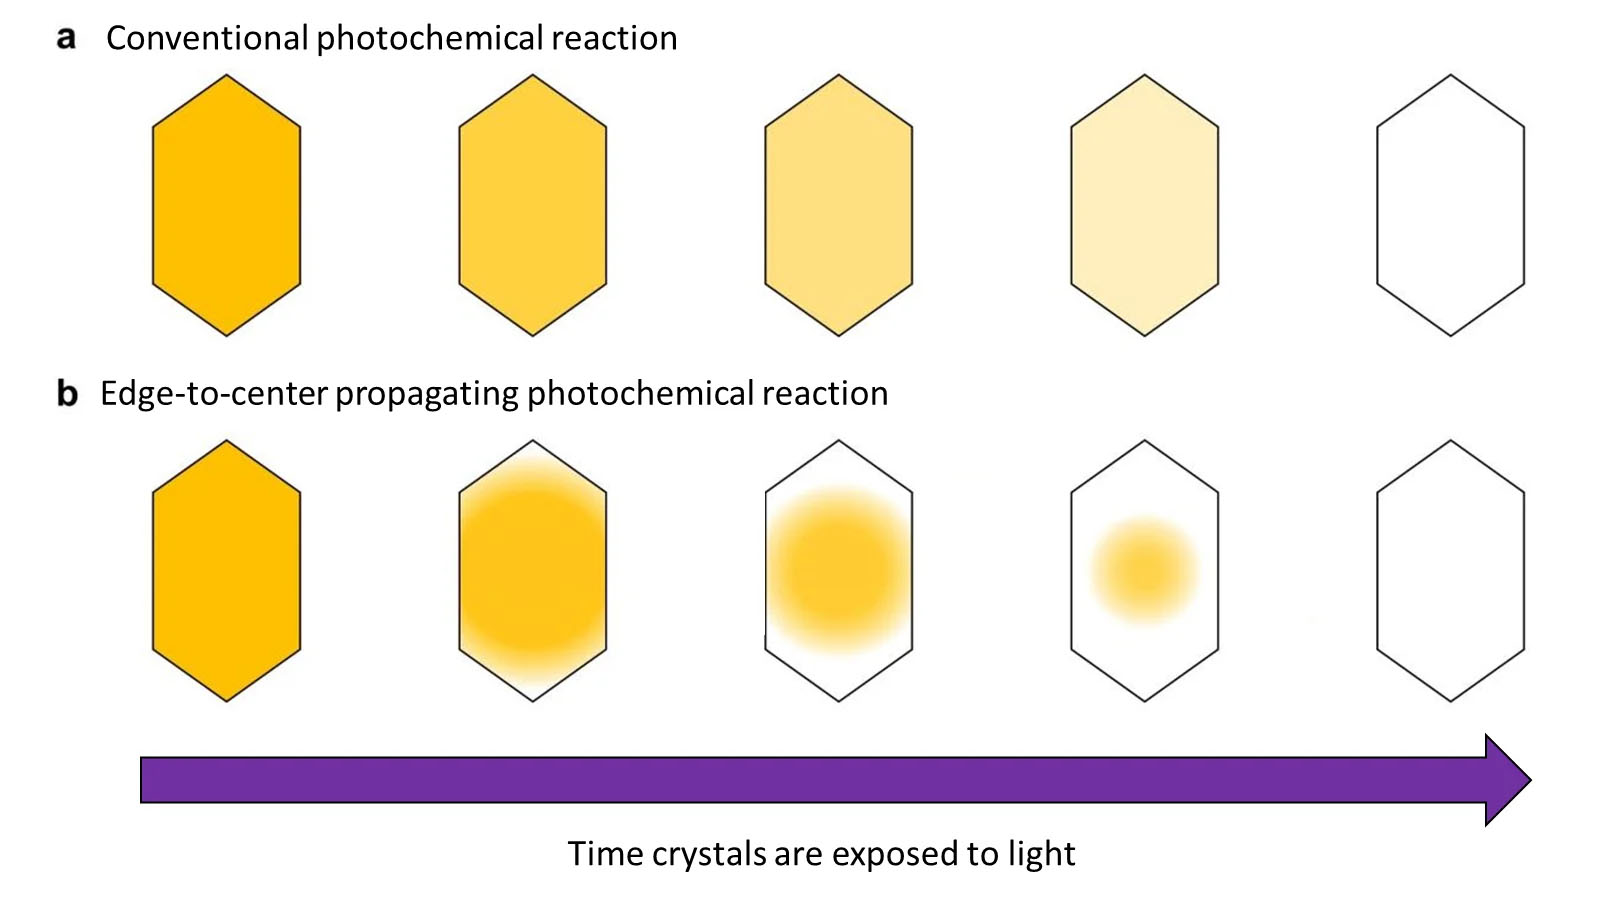 photochemical reactions in a crystal with the color change spreading from the crystal’s edges and propagating to its center